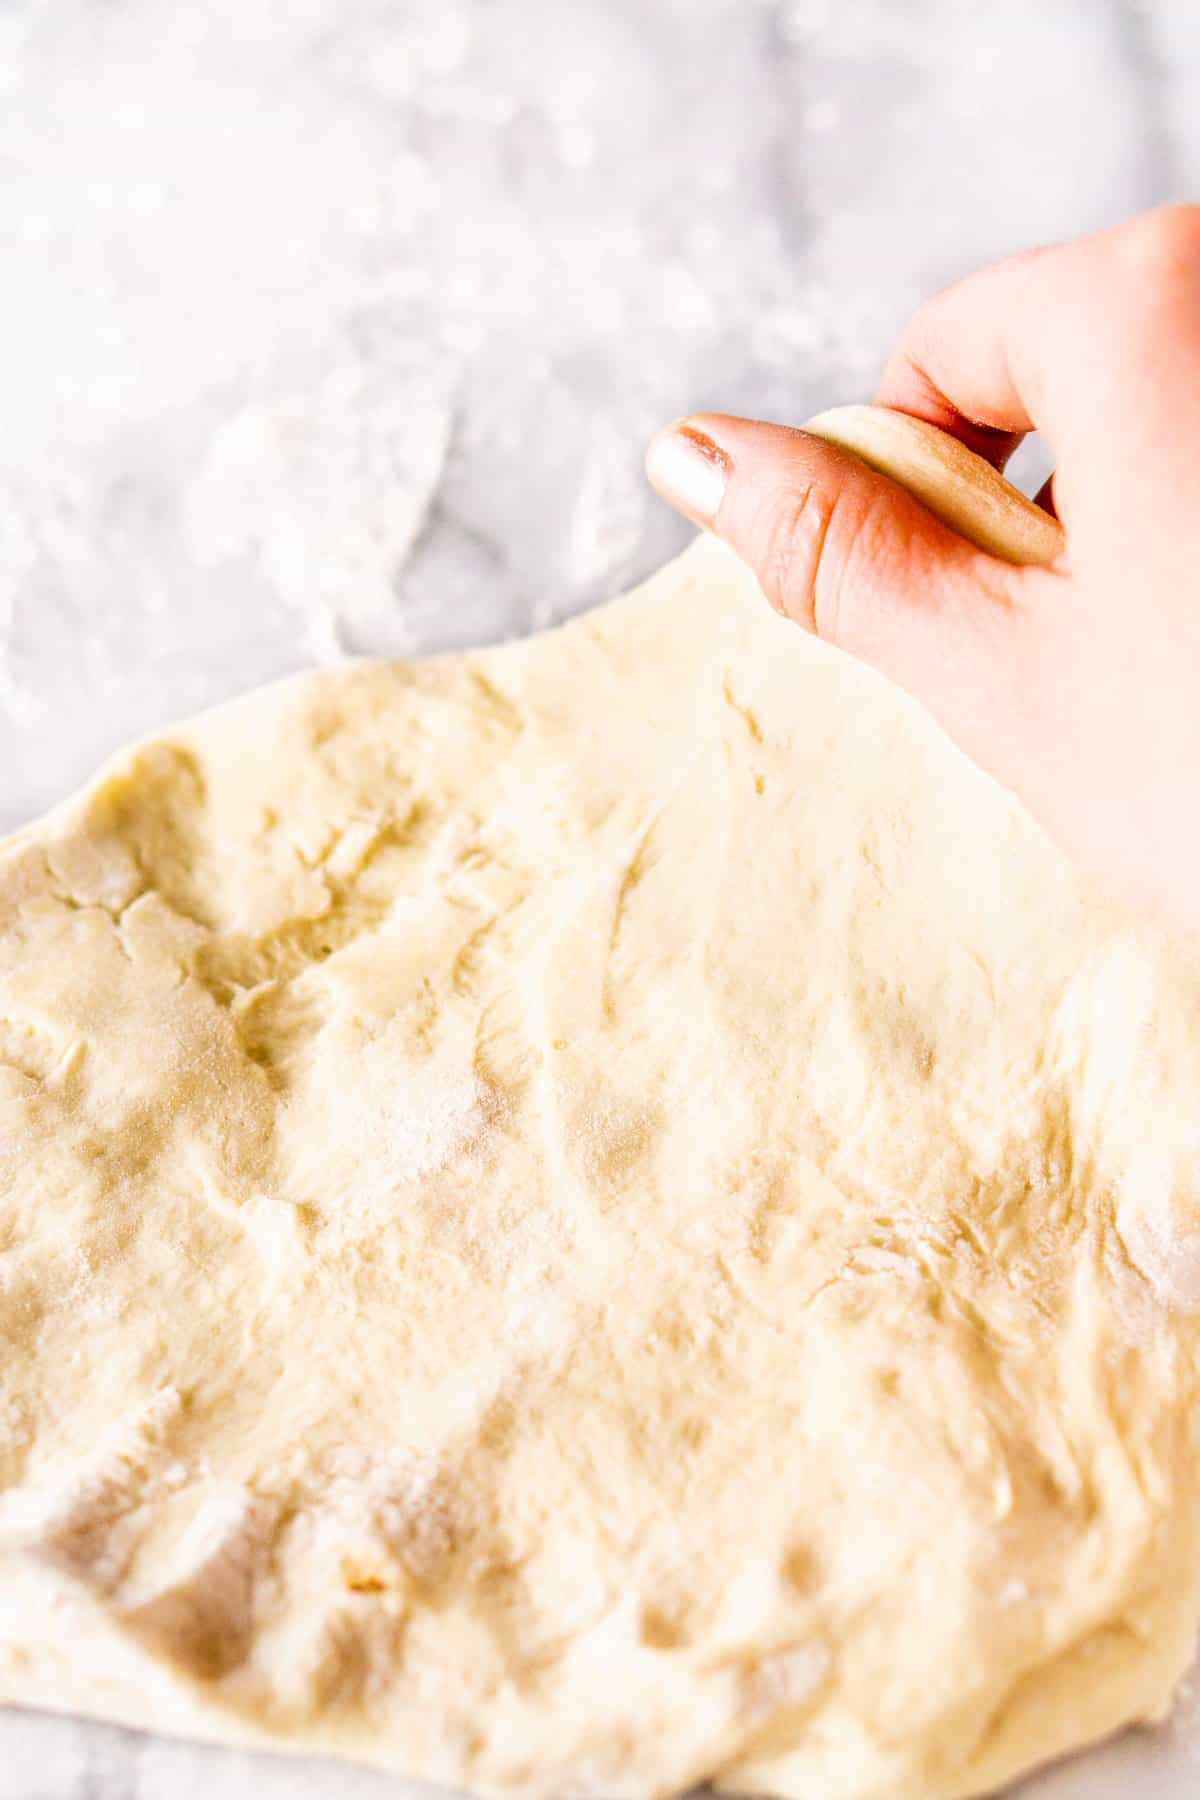 Hand stretching the make-ahead beer pizza dough.